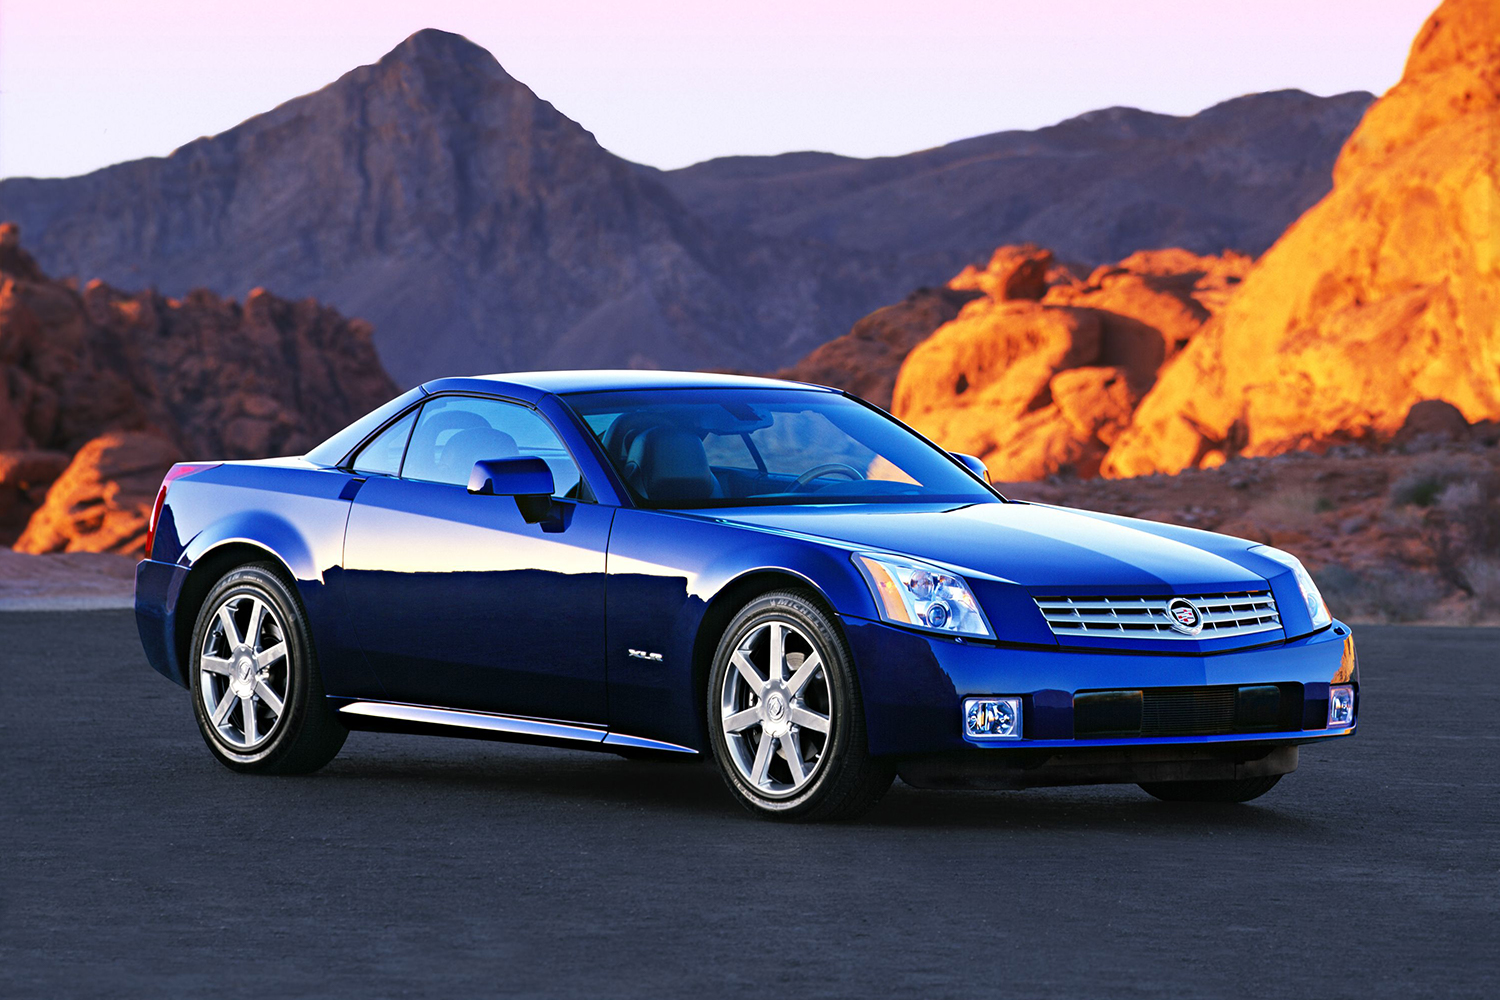 The ill-fated 2004 Cadillac XLR sitting still on the concrete at sunset with desert hills in the background